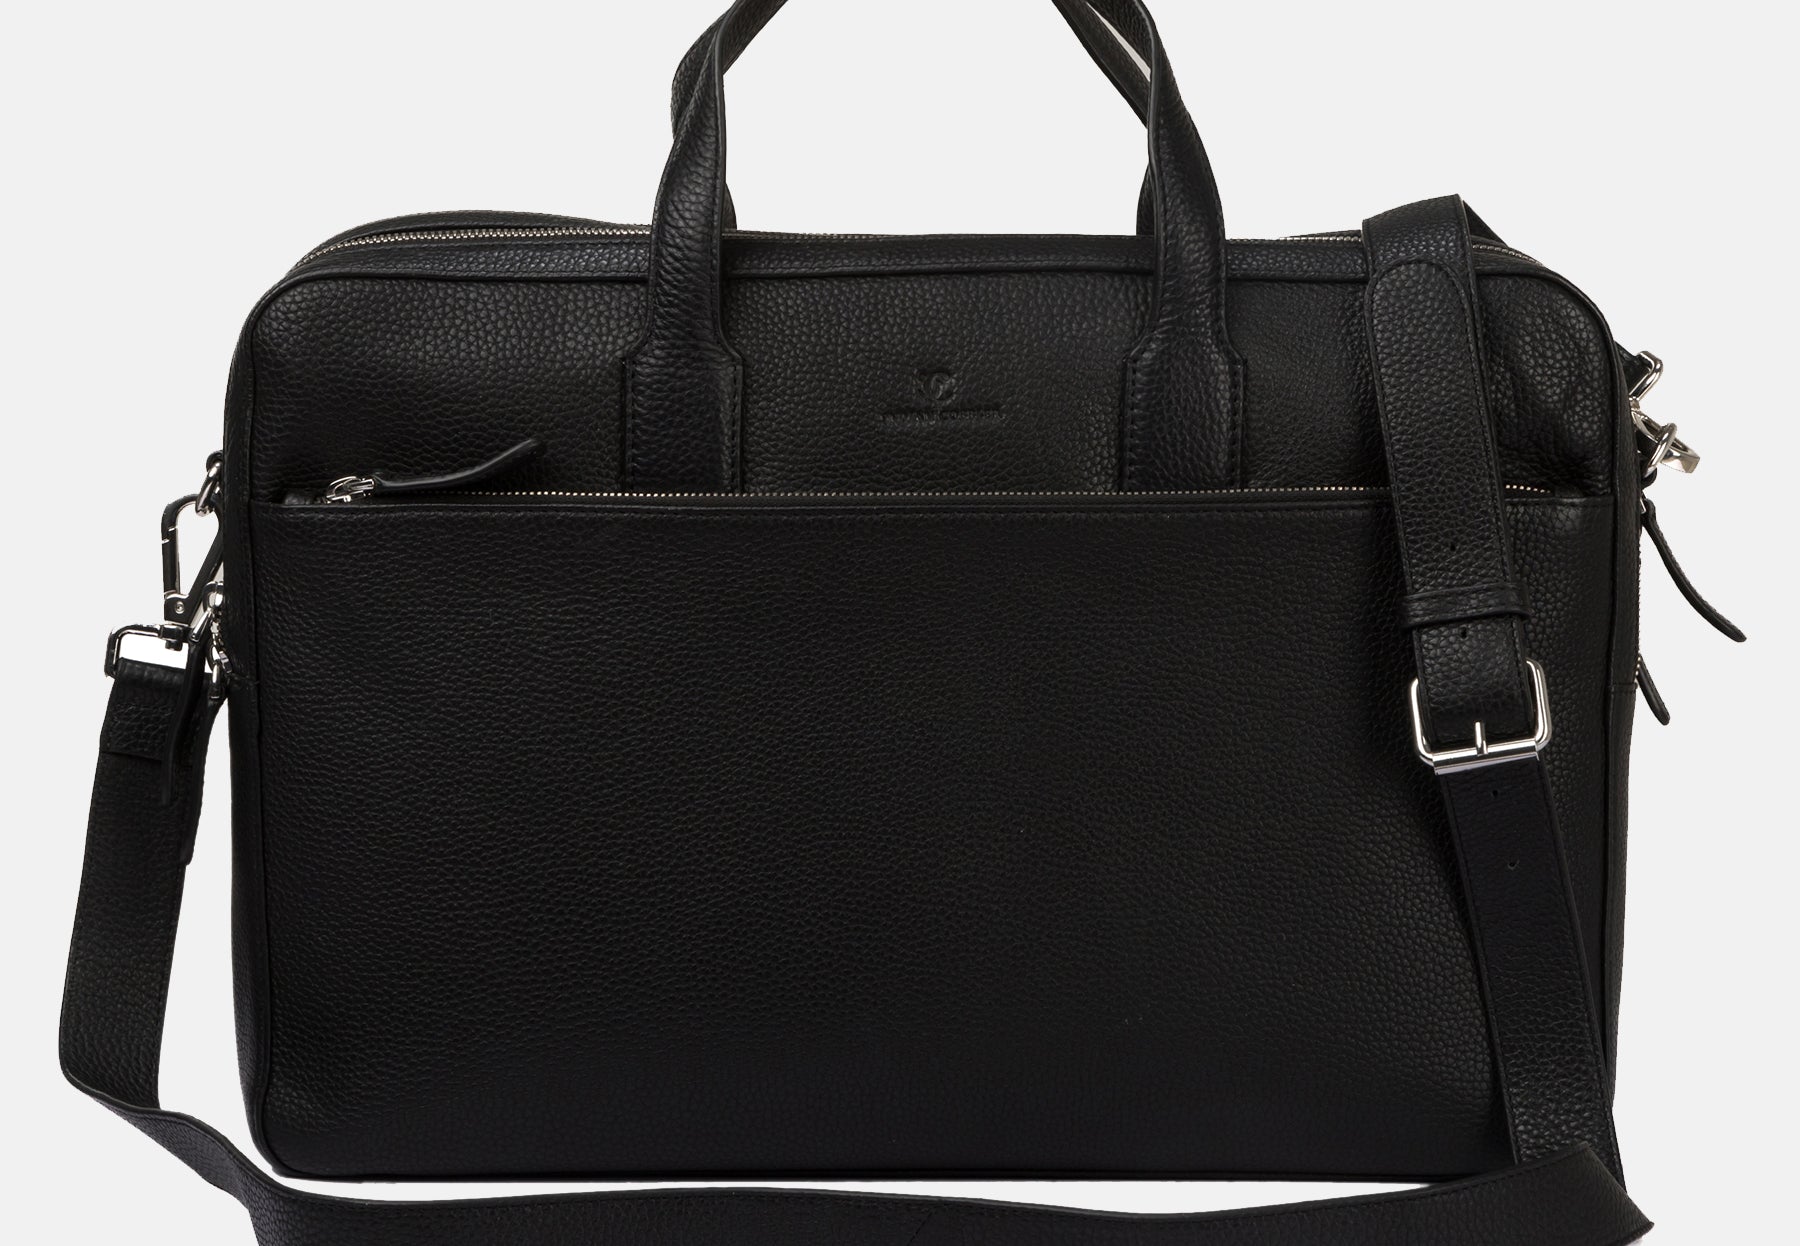 perfect laptop  bag  who carry more than 2-4 electronic gadgets like laptop ,tablets etc